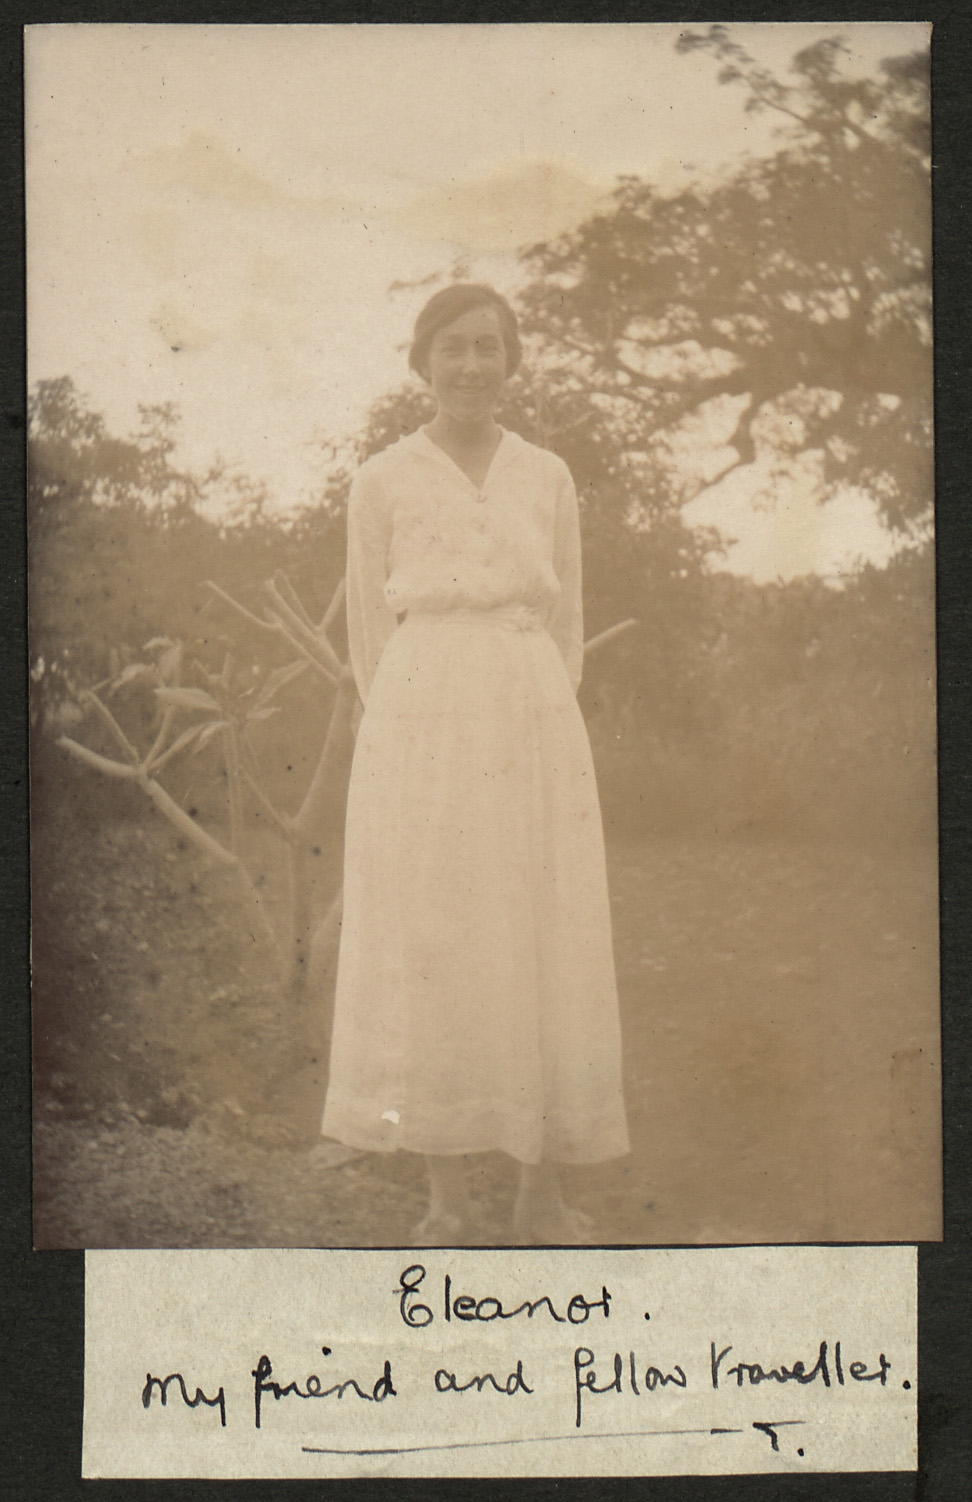 Old Photgraph of Eleanor Kemp, a woman mentioned in the diary. She is smiling, clothed in a long white dress and surrounded by trees,